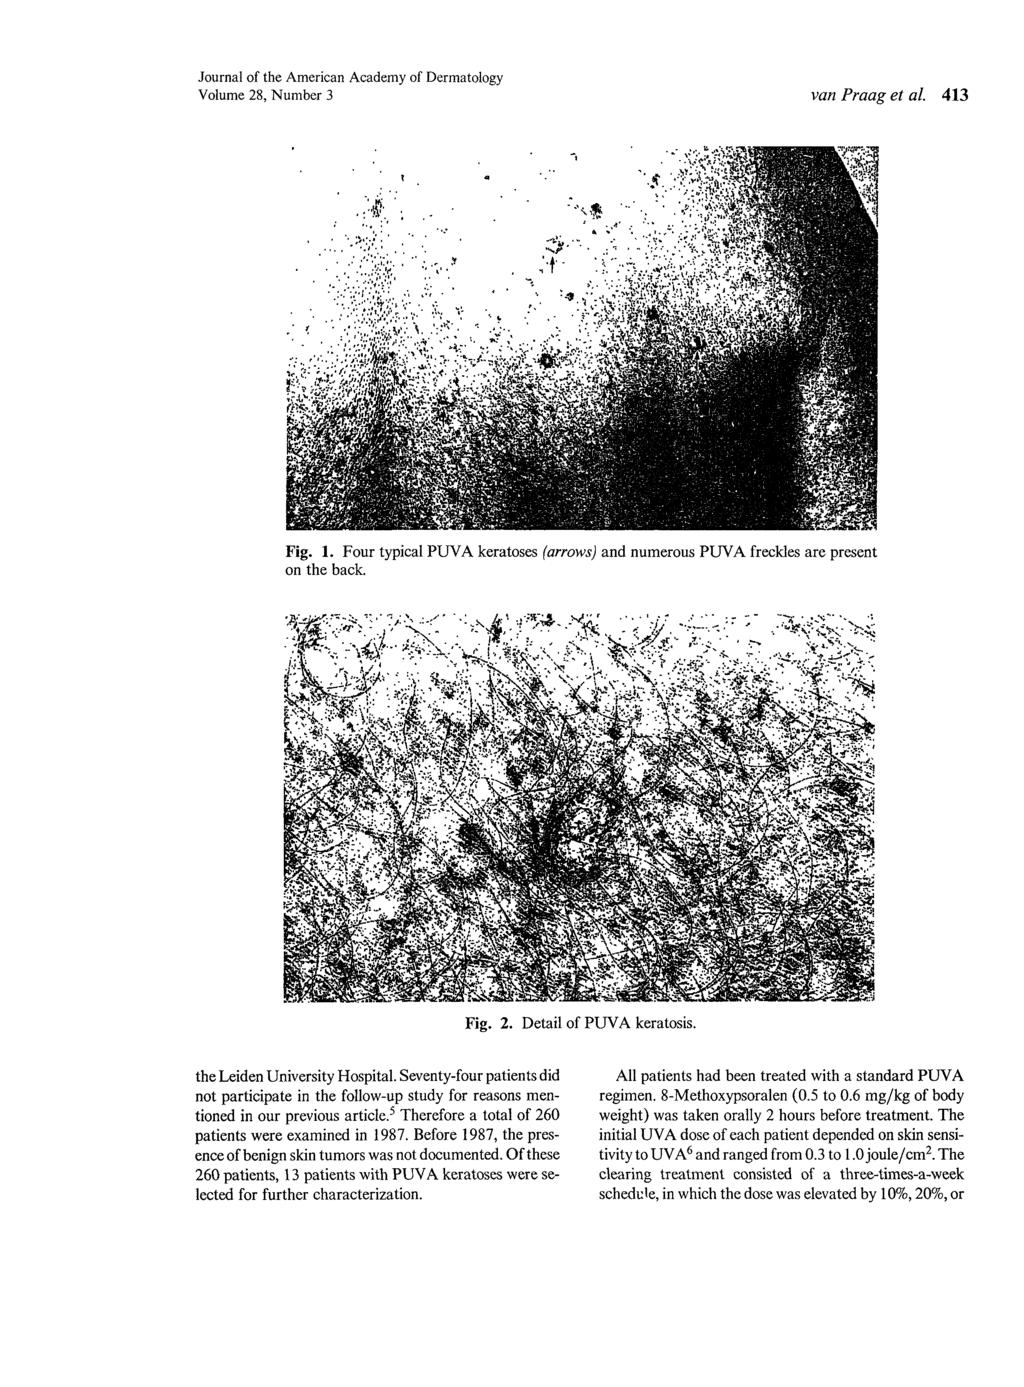 Journal of the American Academy of Dermatology Volume 28, Number 3 van Praag et al. 413 Fig. 1. Four typical PUVA keratoses (arrows) and numerous PUVA freckles are present on the back. Fig. 2. Detail of PUVA keratosis.